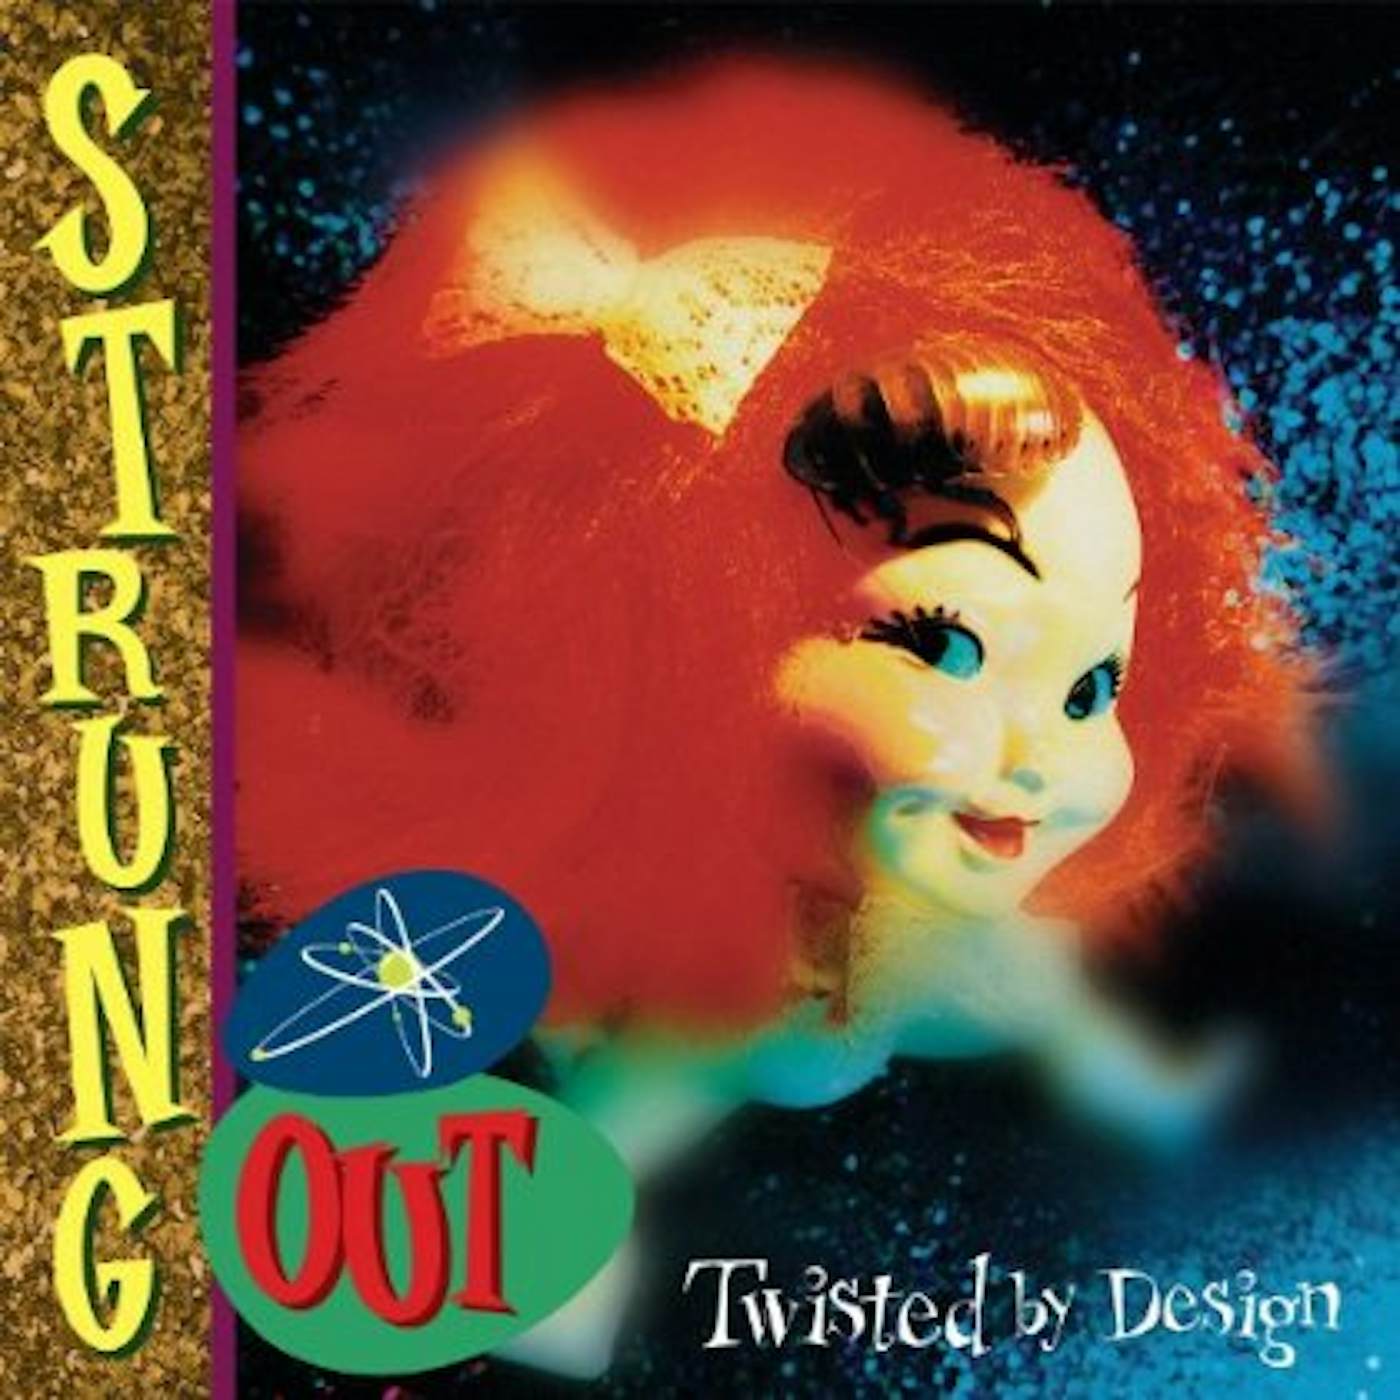 Strung Out TWISTED BY DESIGN Vinyl Record